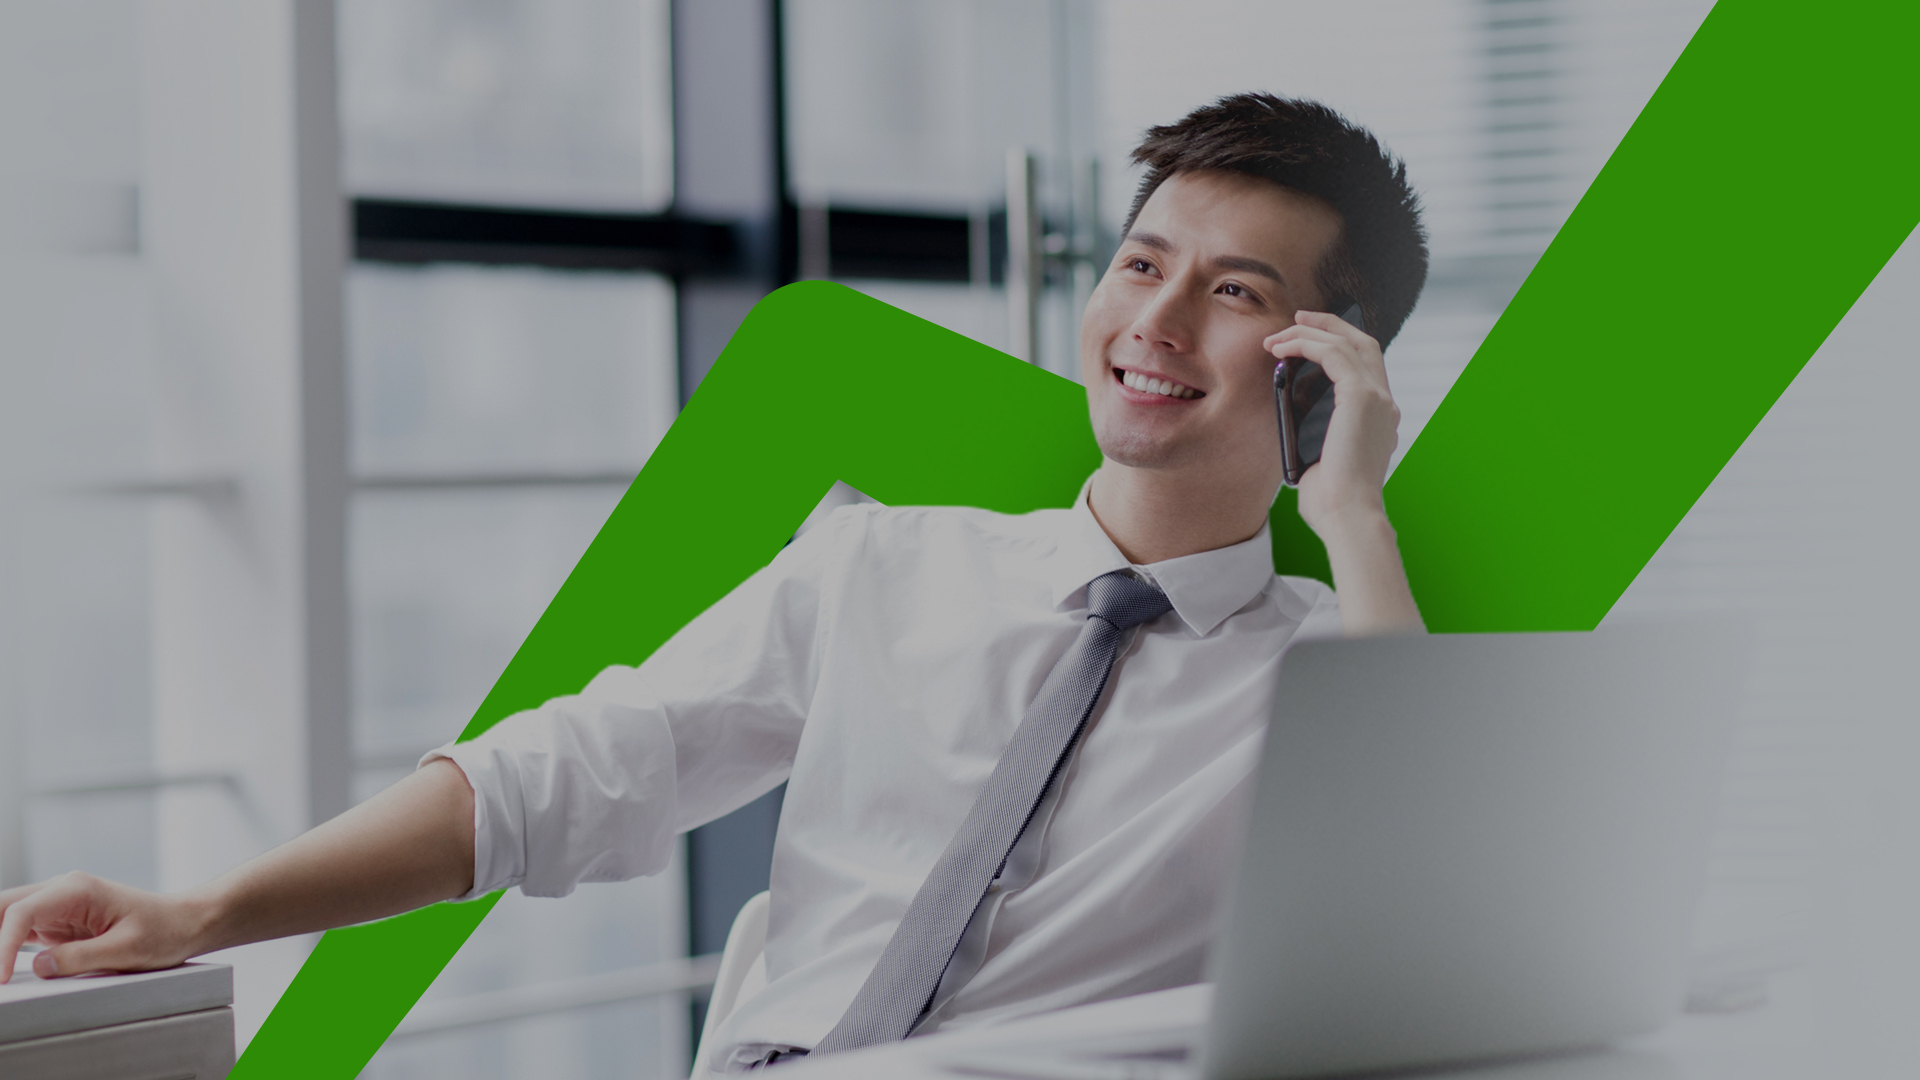 Maxis launches revolutionary Managed Voice to future proof communications systems for businesses